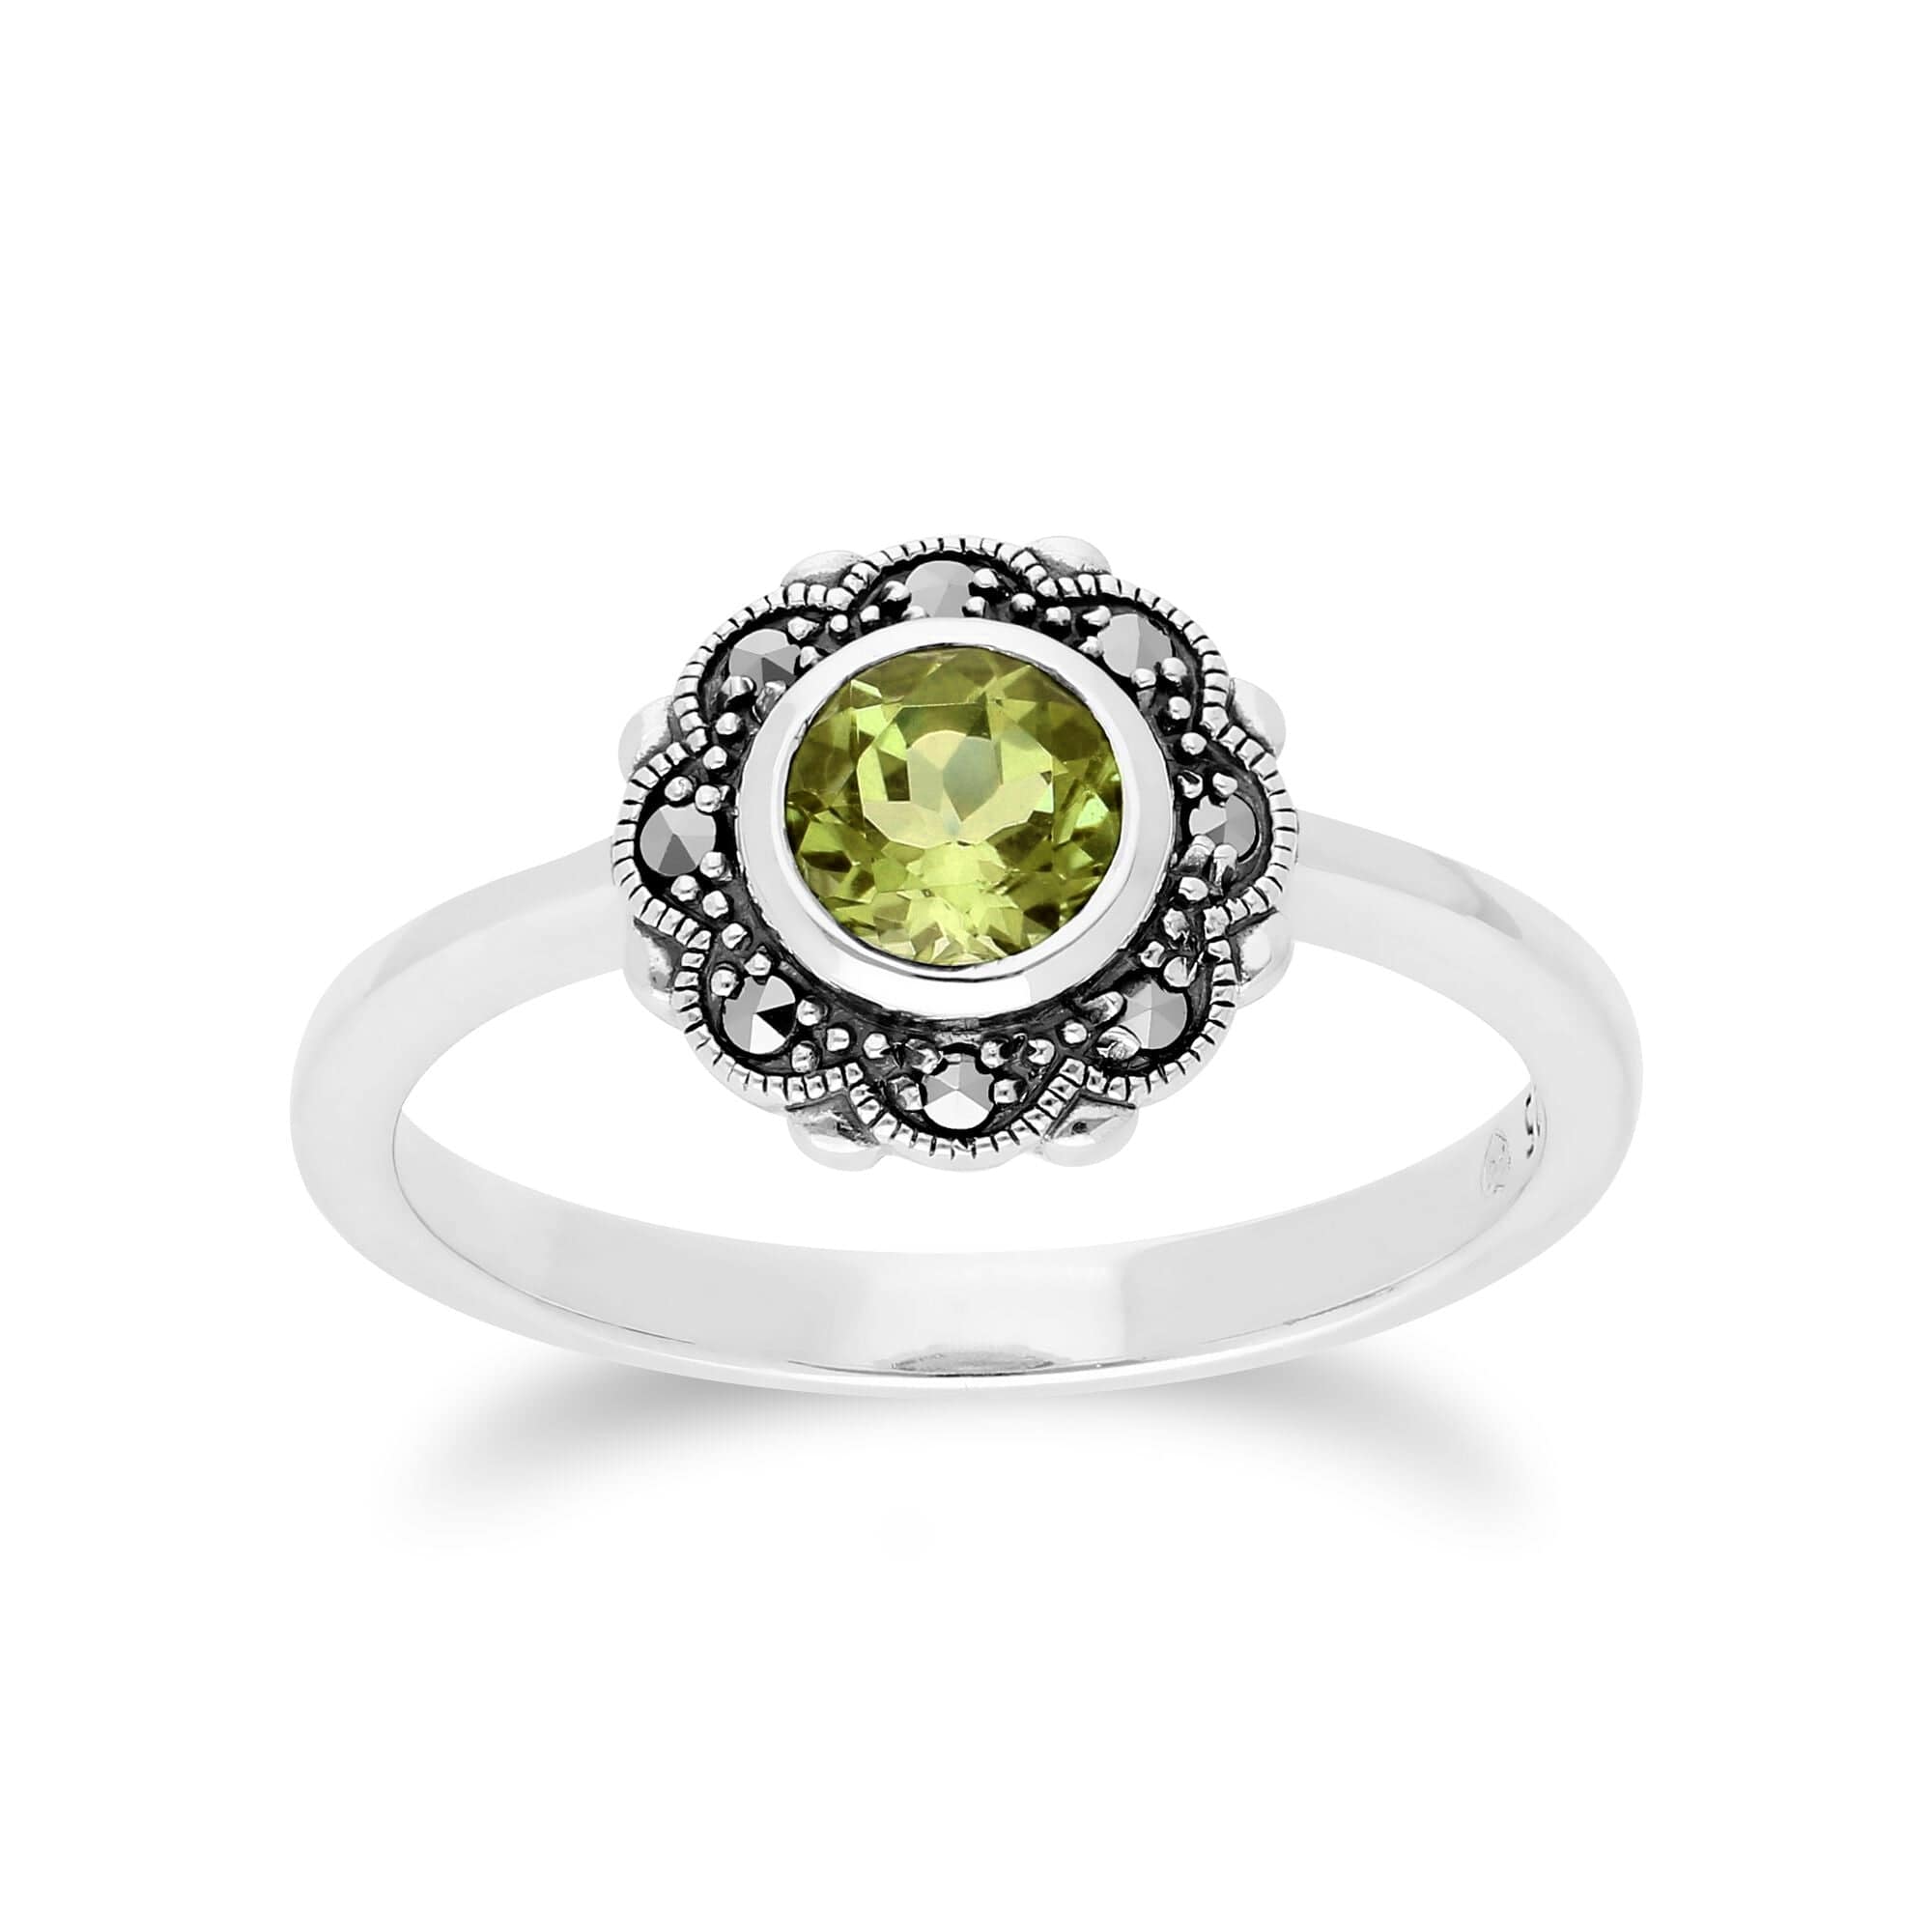 214R597004925 Floral Round Peridot & Marcasite Halo Ring in 925 Sterling Silver 1